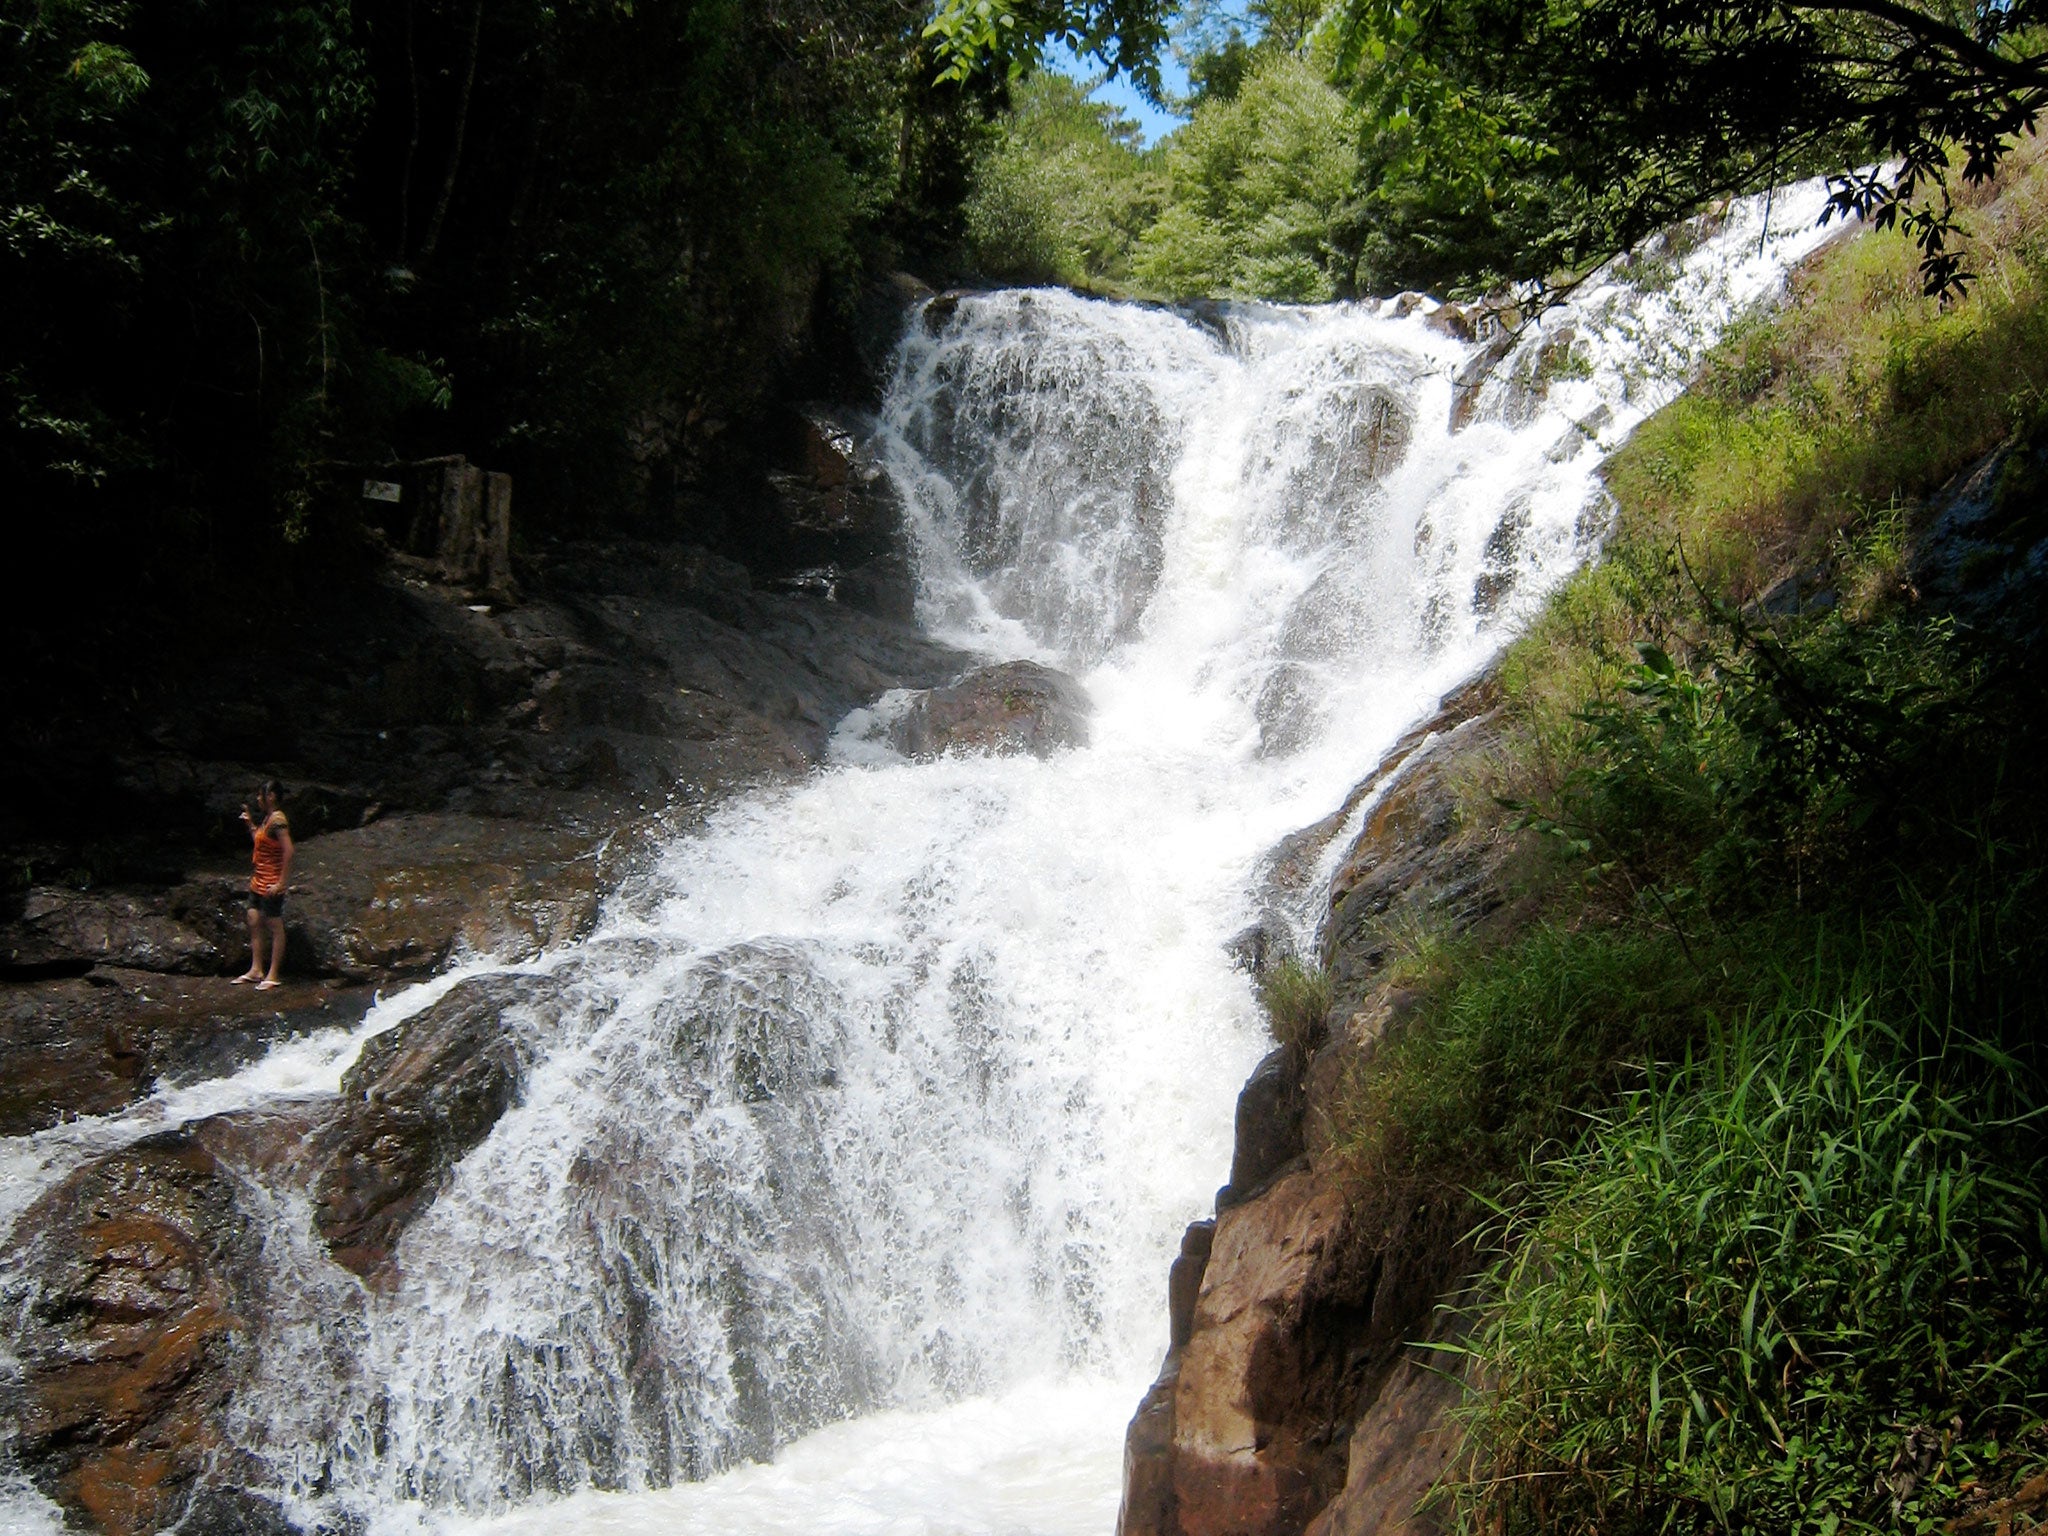 The Datanla waterfall in central Vietnam